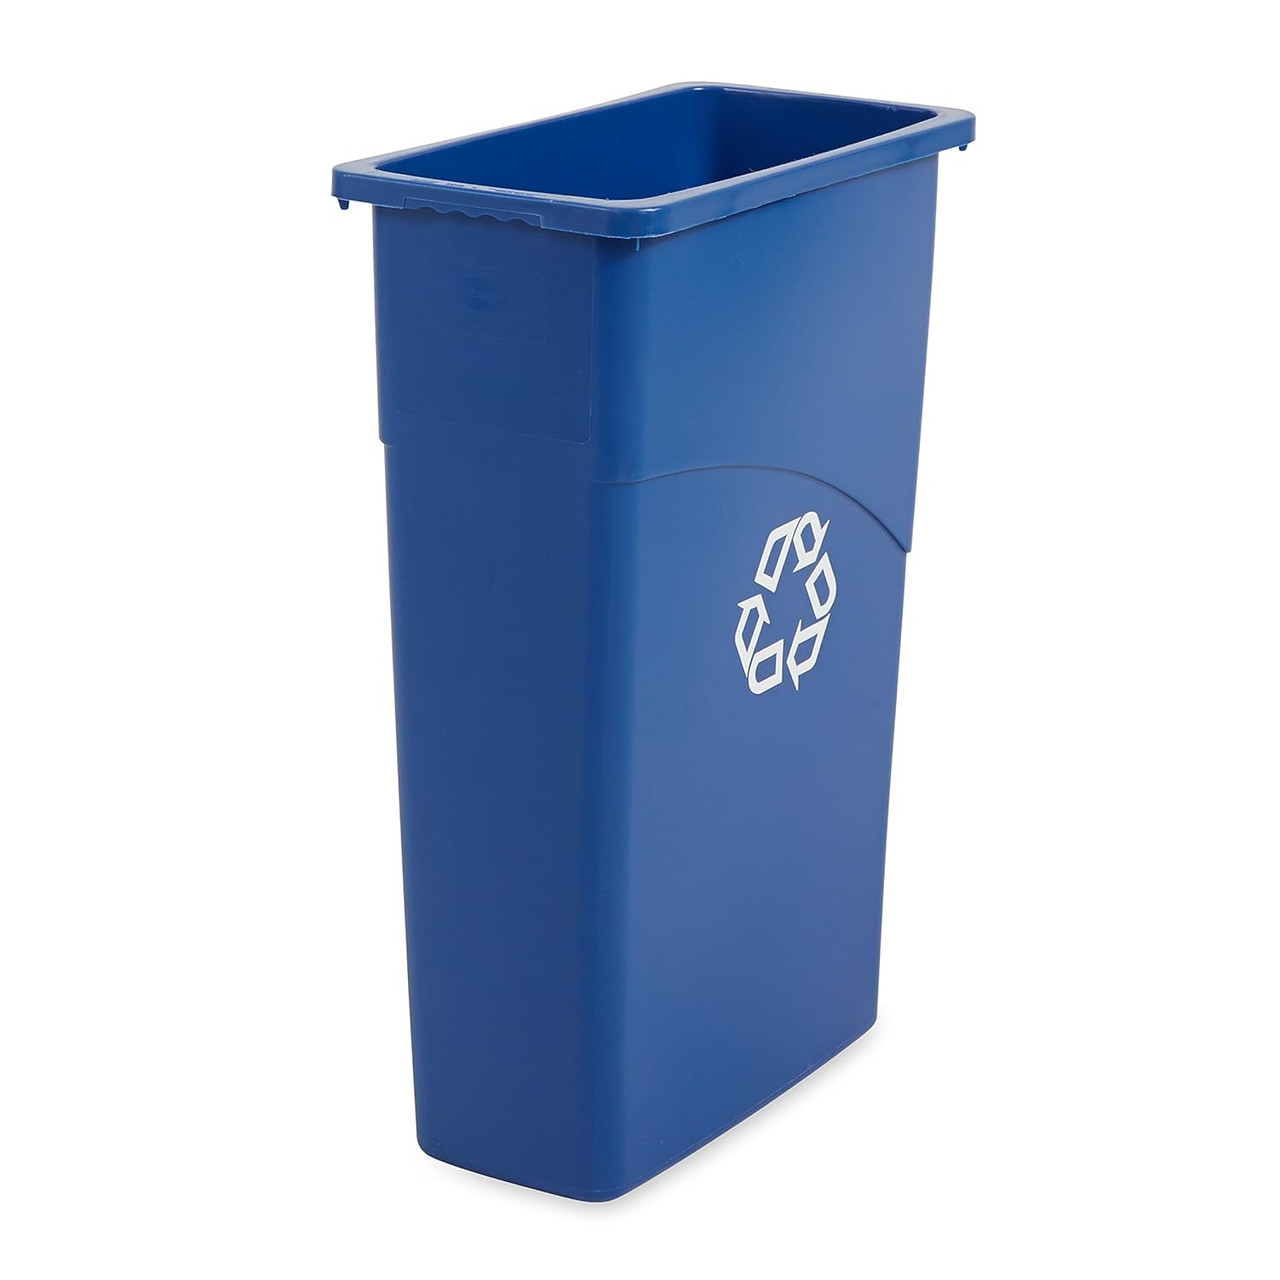 FG354075BLUE - Rubbermaid Slim Jim Recycling Container (Old Style) - 87 Ltr - Blue